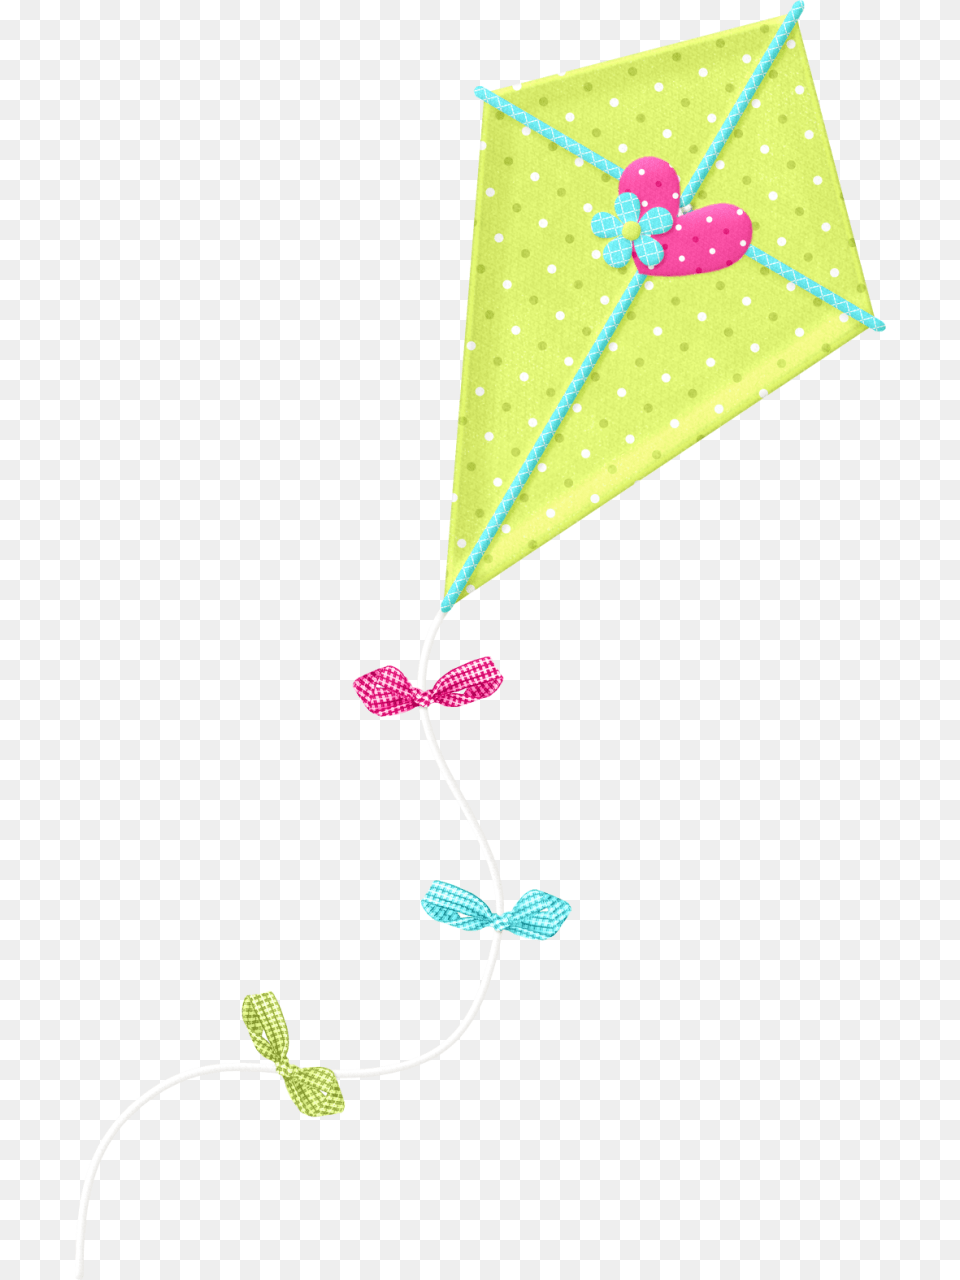 Pin By Saray Blacett Cometas De Papel Gif, Toy, Kite Free Png Download